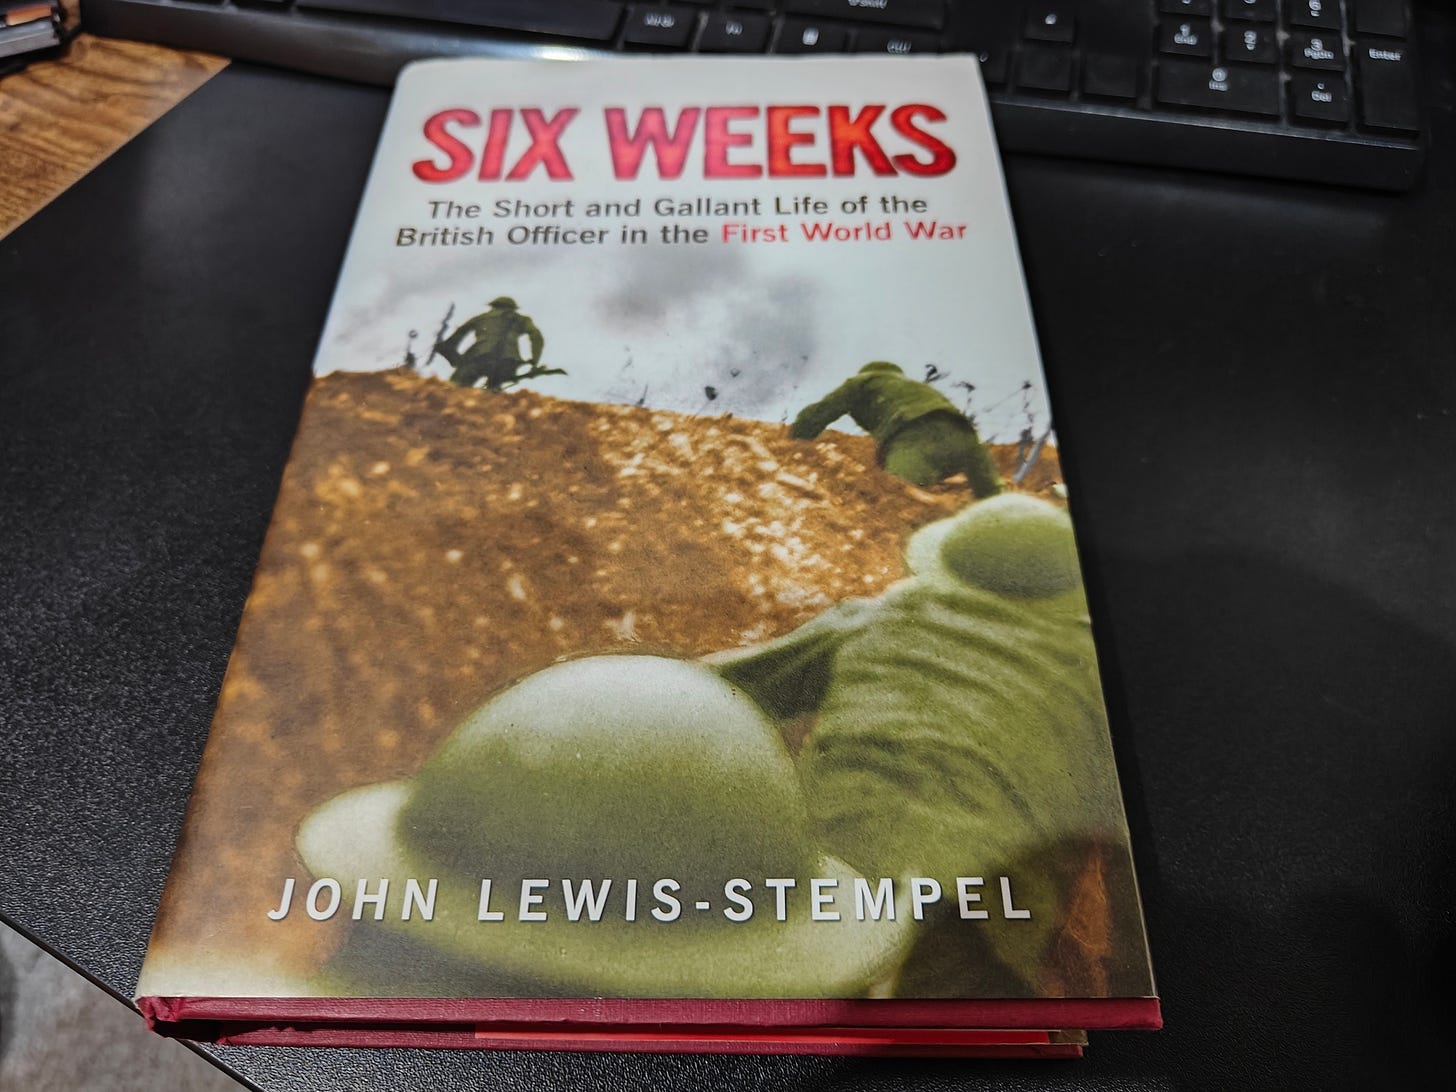 The book "Six Weeks - The short and gallant life of a British officer in the First World War" lying on a desk. A computer keyboard intrudes at the top of the photo. The book cover shows four British soldiers climbing from a trench and heading out into "no man's" land".